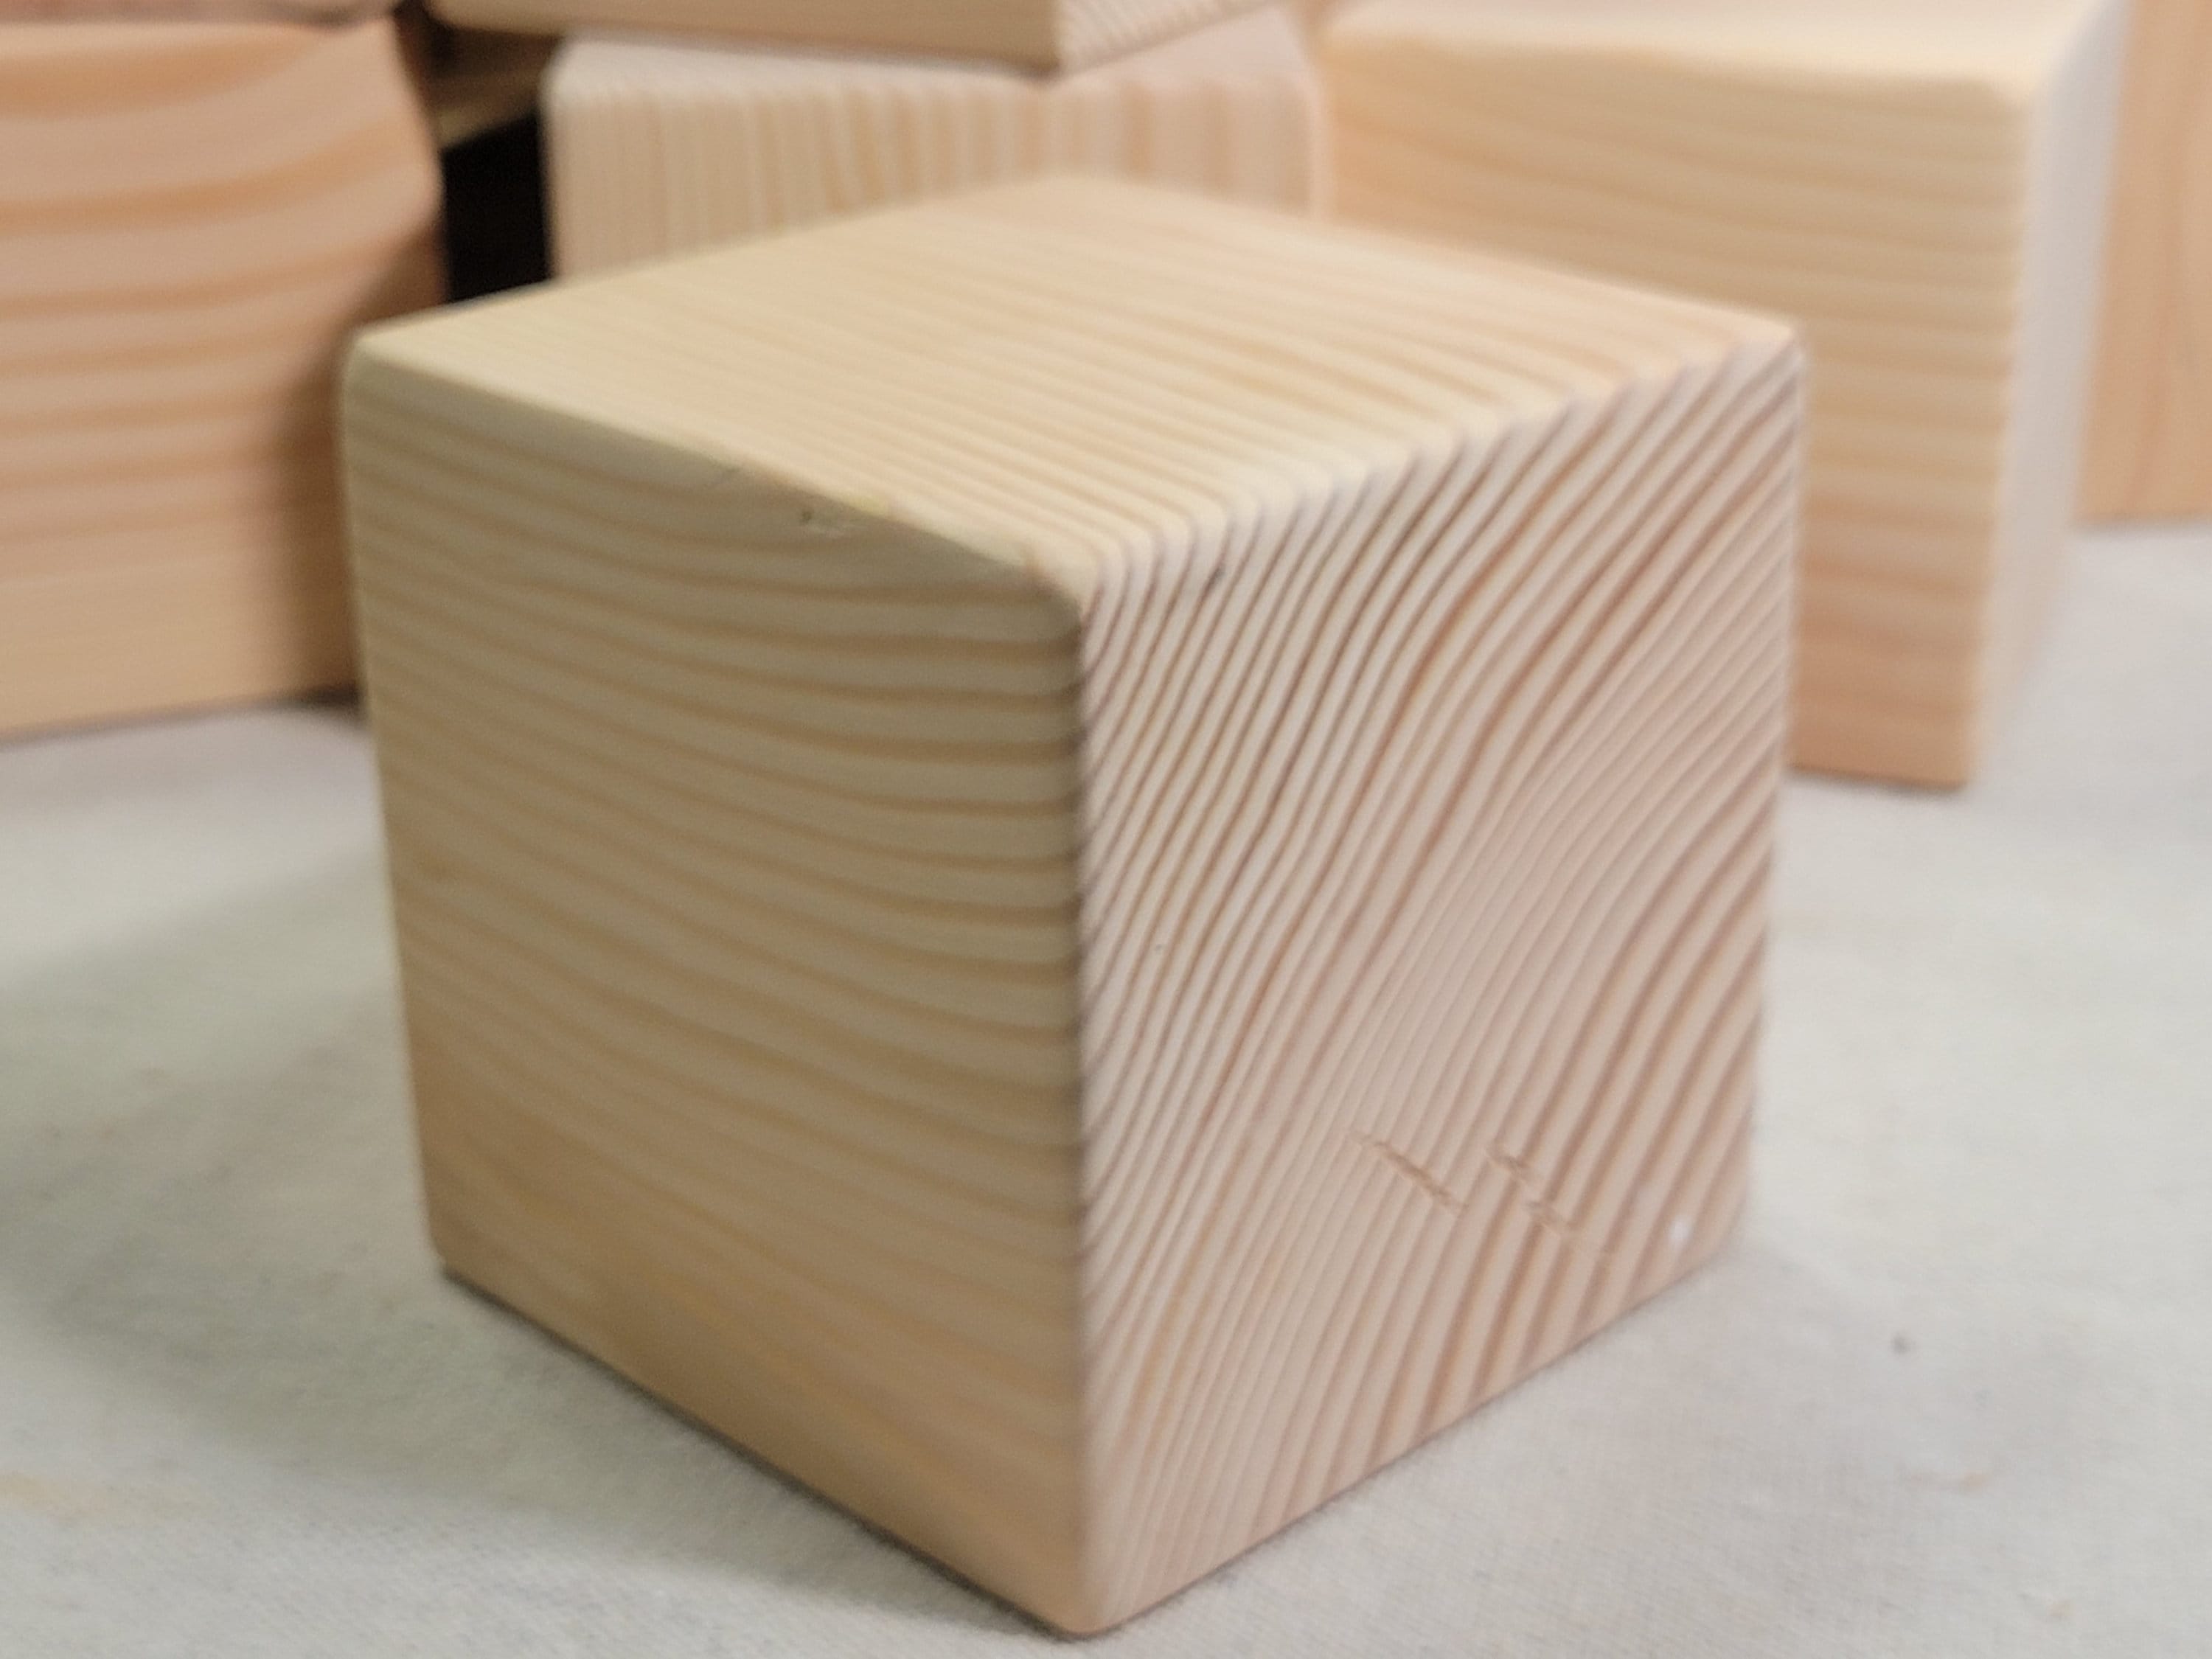 10 Wood Cubes 15mm Wooden Craft Blocks, Unfinished Natural Wood